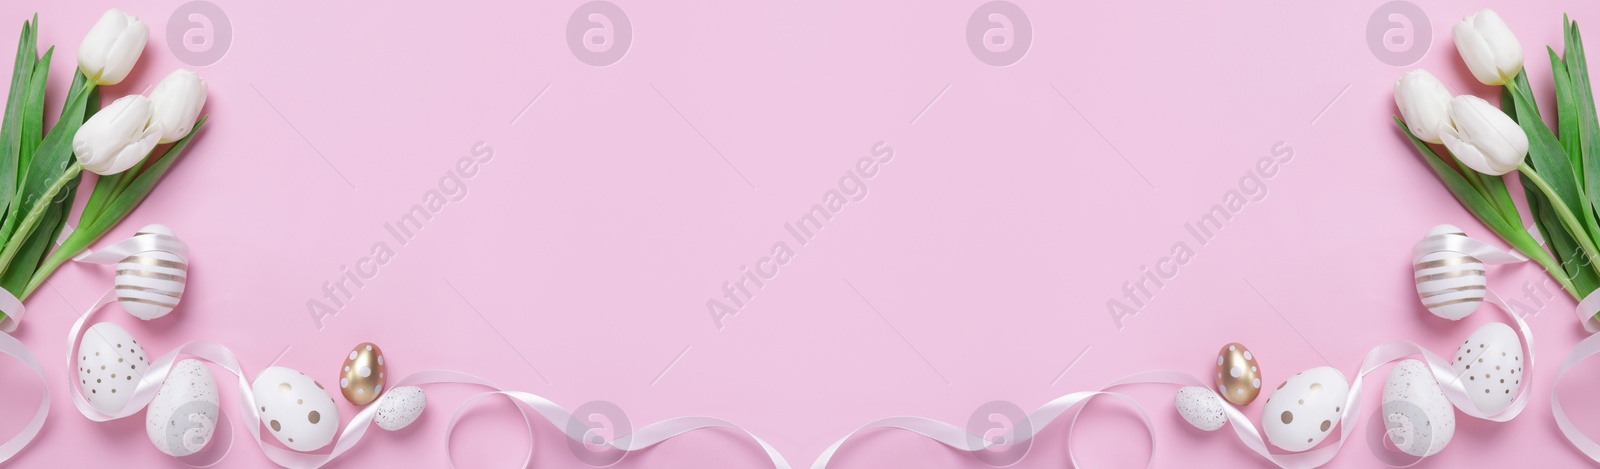 Image of Flat lay composition with decorated Easter eggs and flowers on pink background, space for text. Banner design